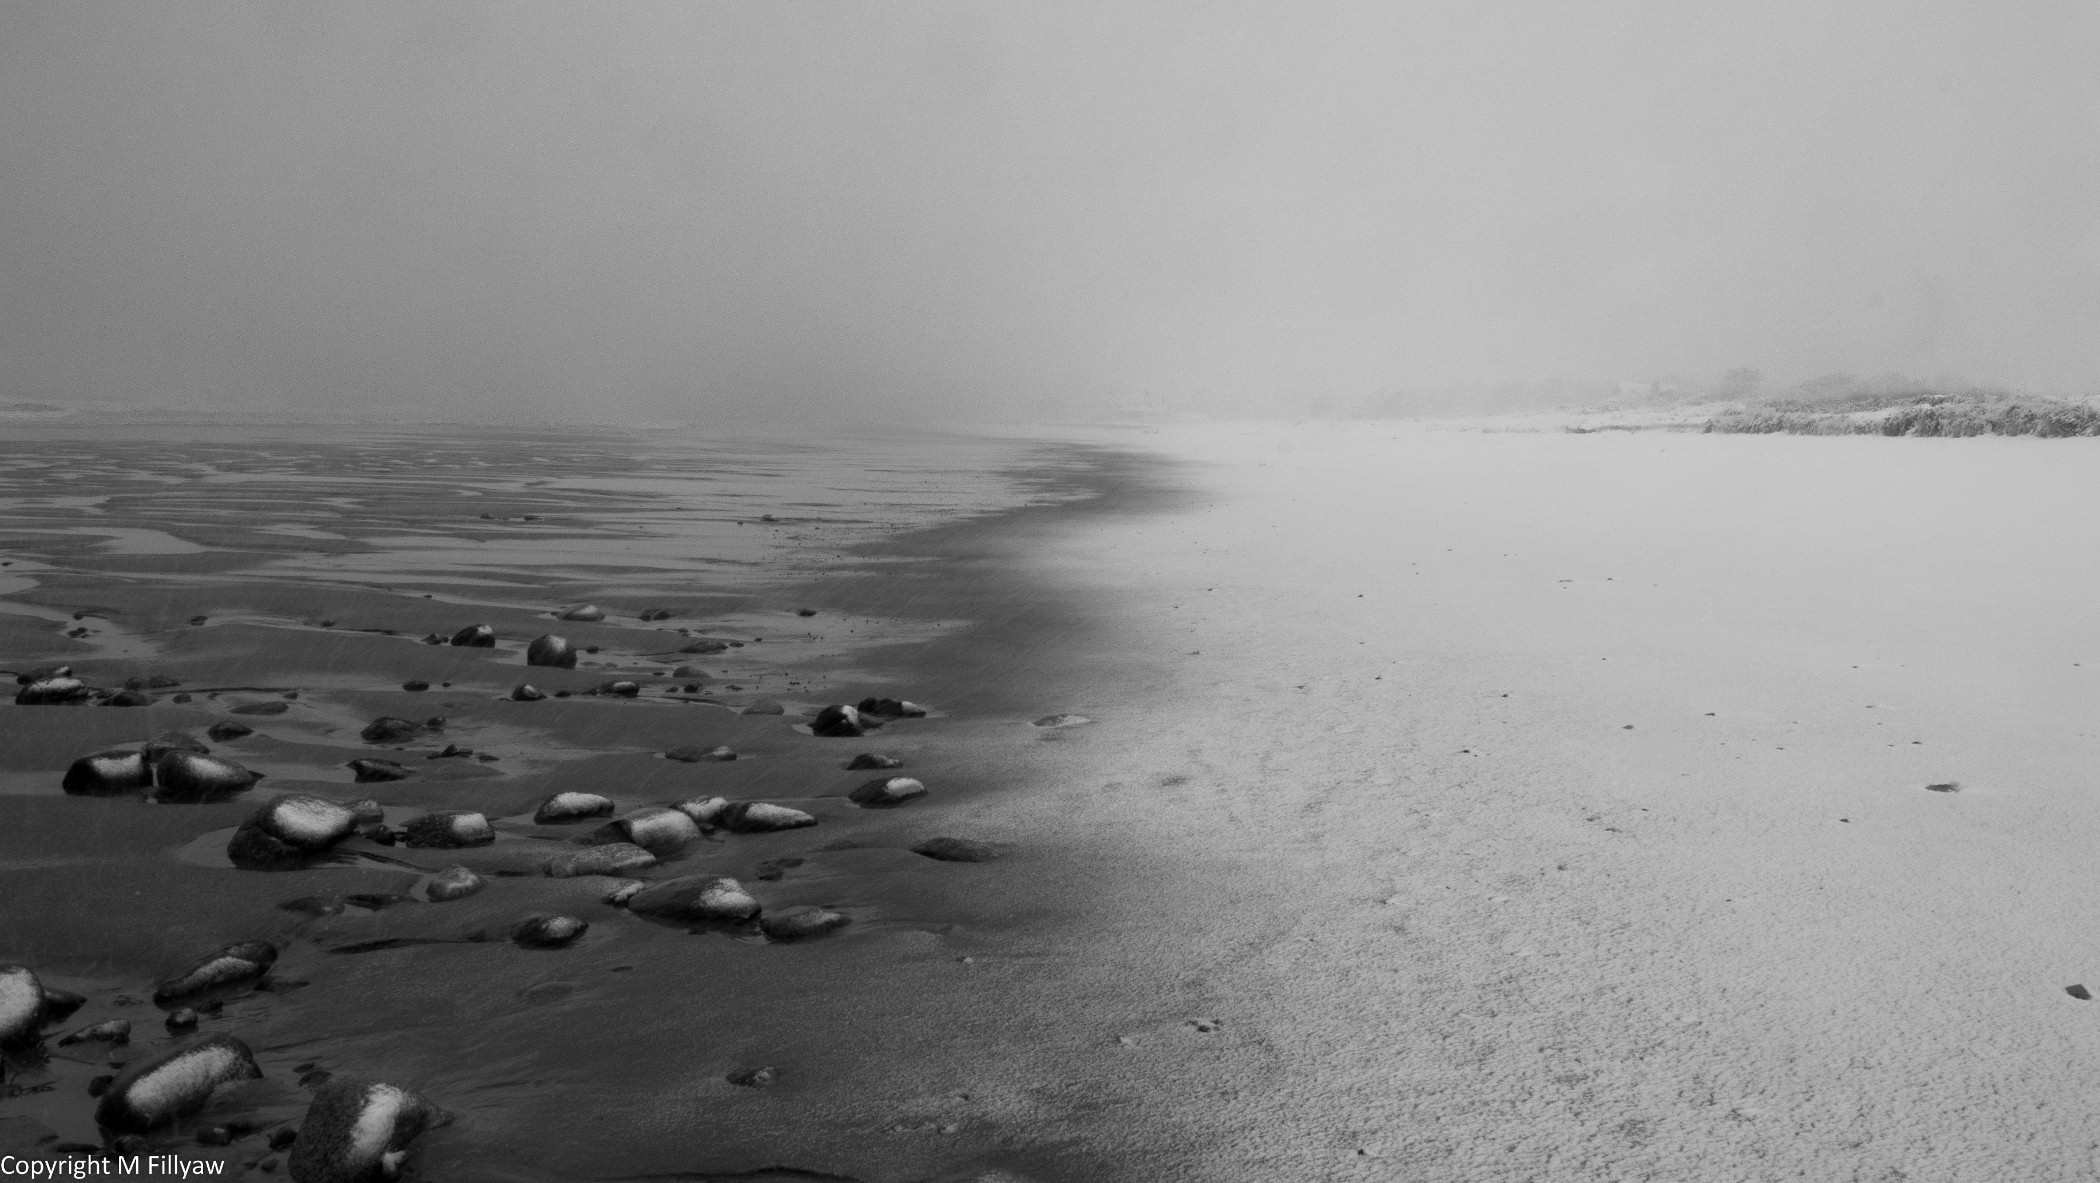 Snowstorm At Low Tide (user submitted)